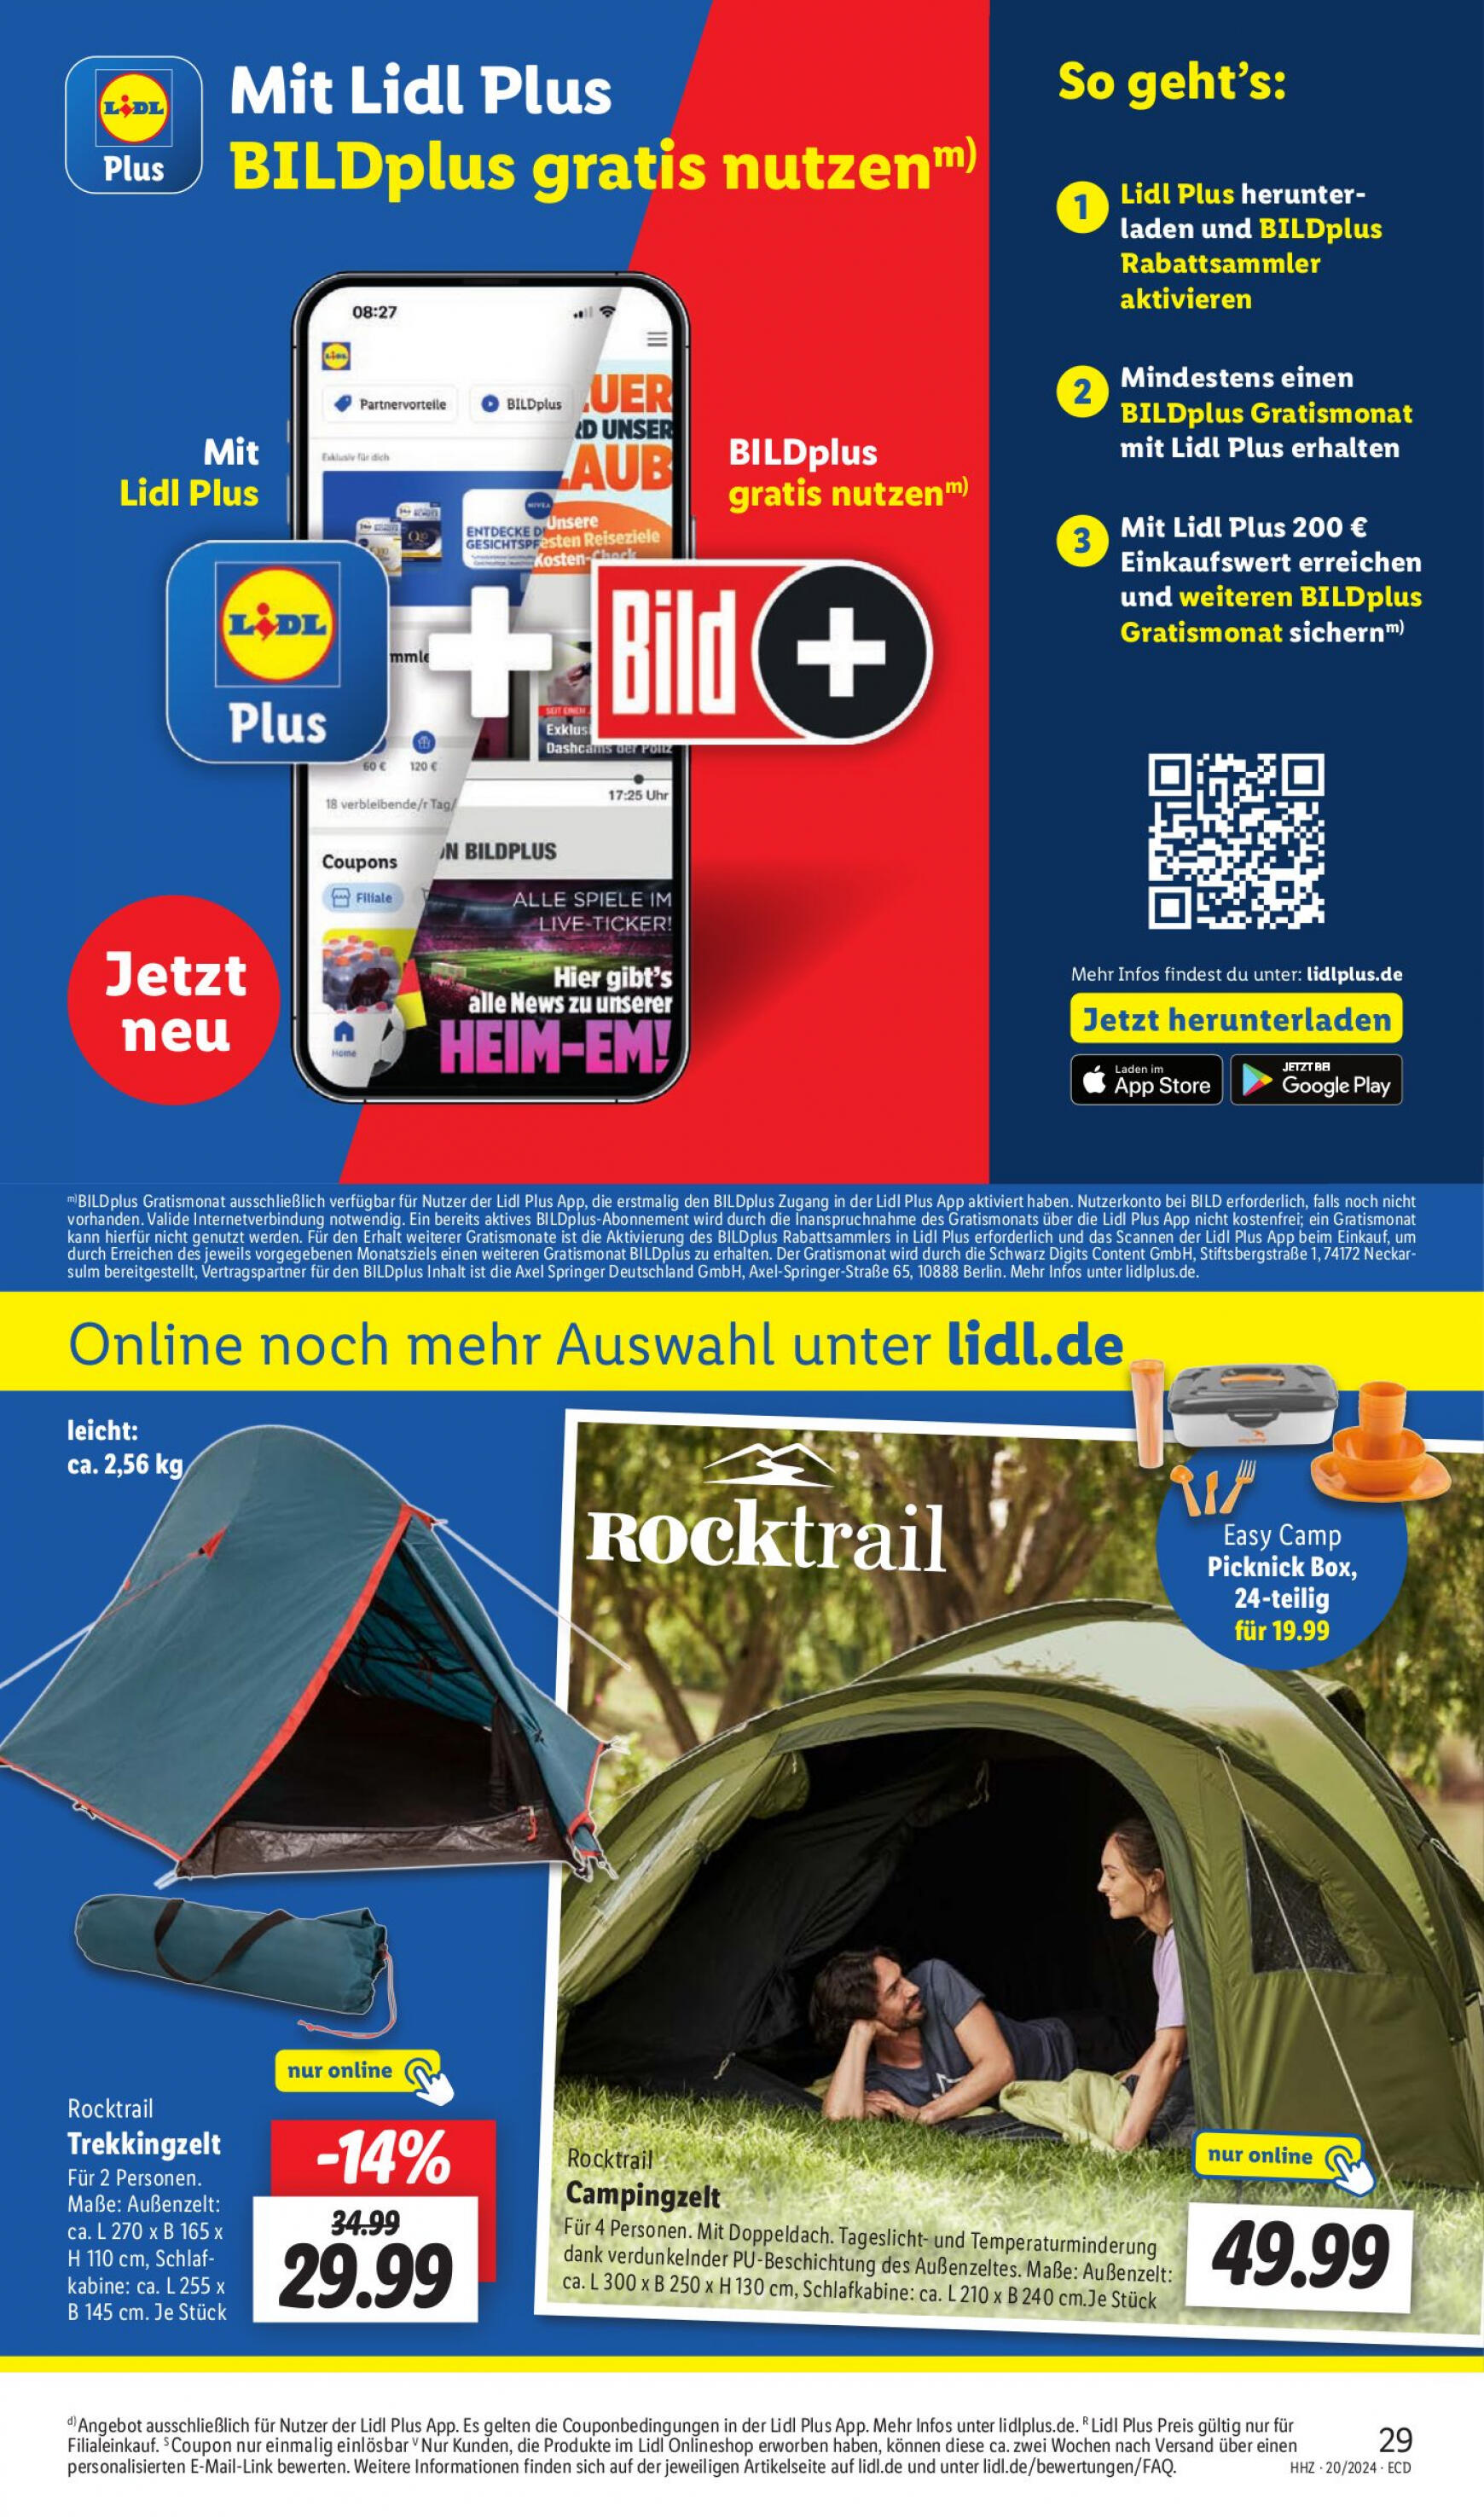 lidl - Flyer Lidl aktuell 13.05. - 18.05. - page: 35